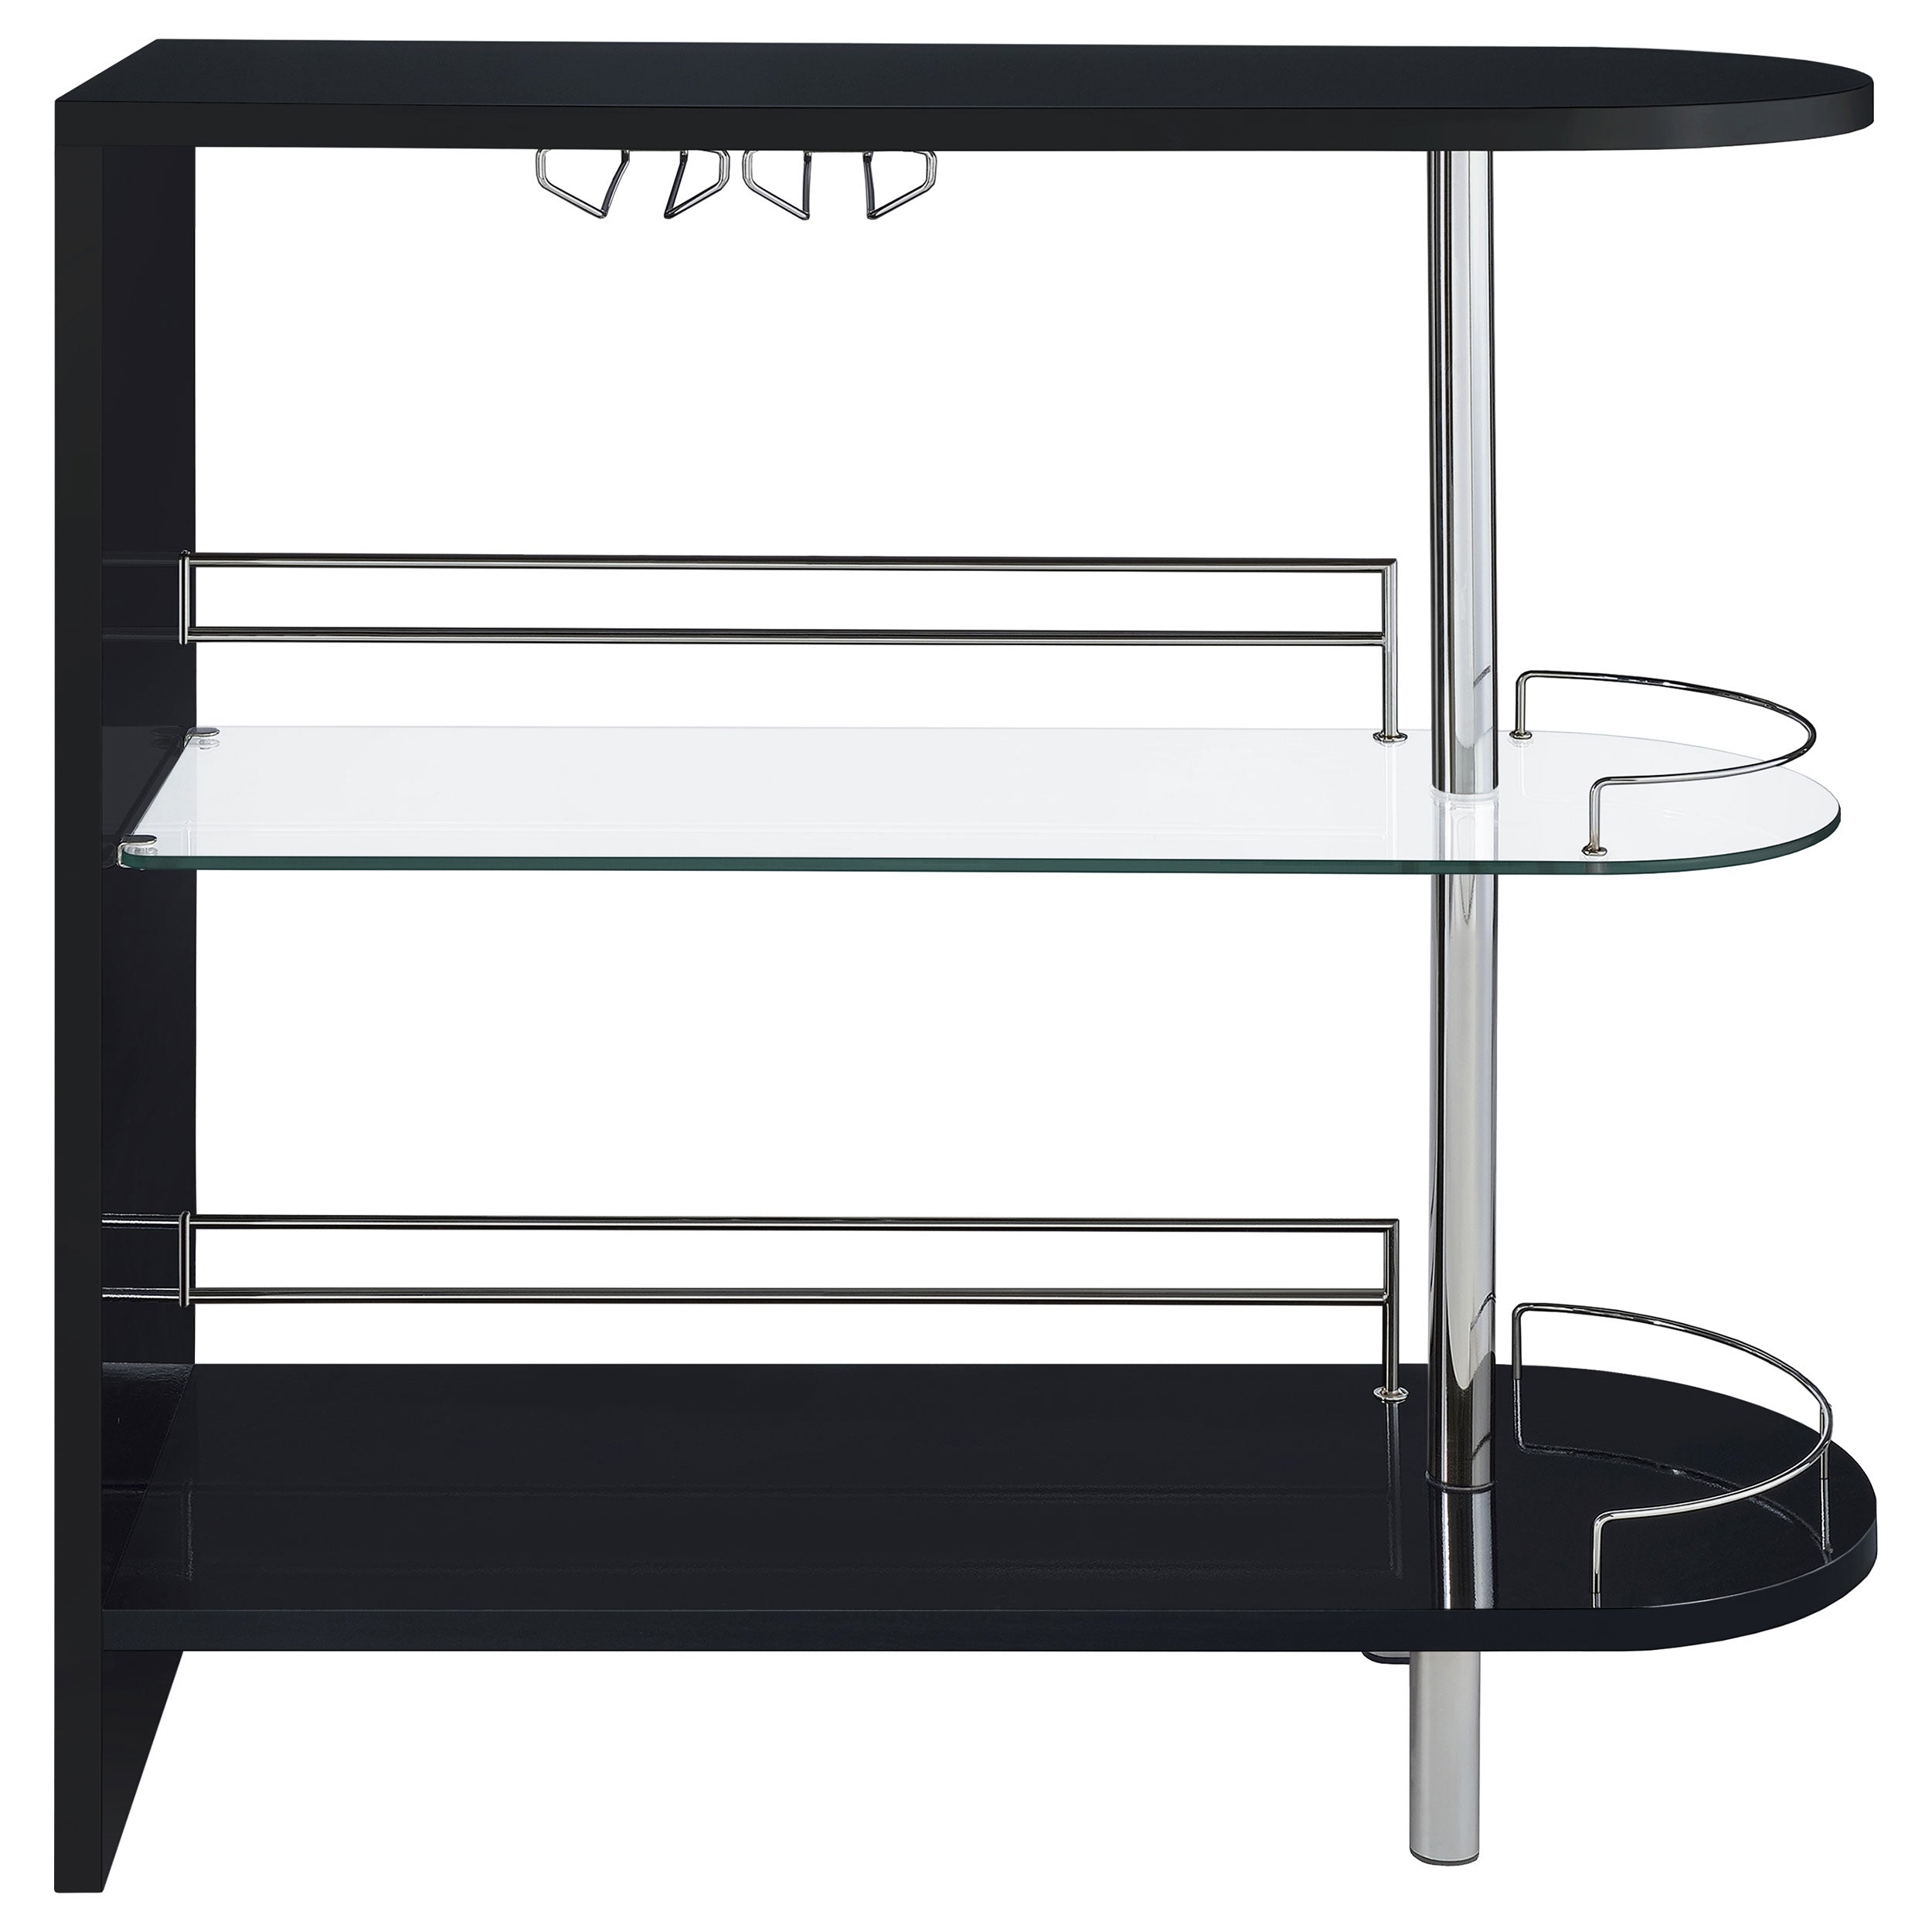 Papke 3-tier Bar Table Glossy Black and Clear Home Bar Black